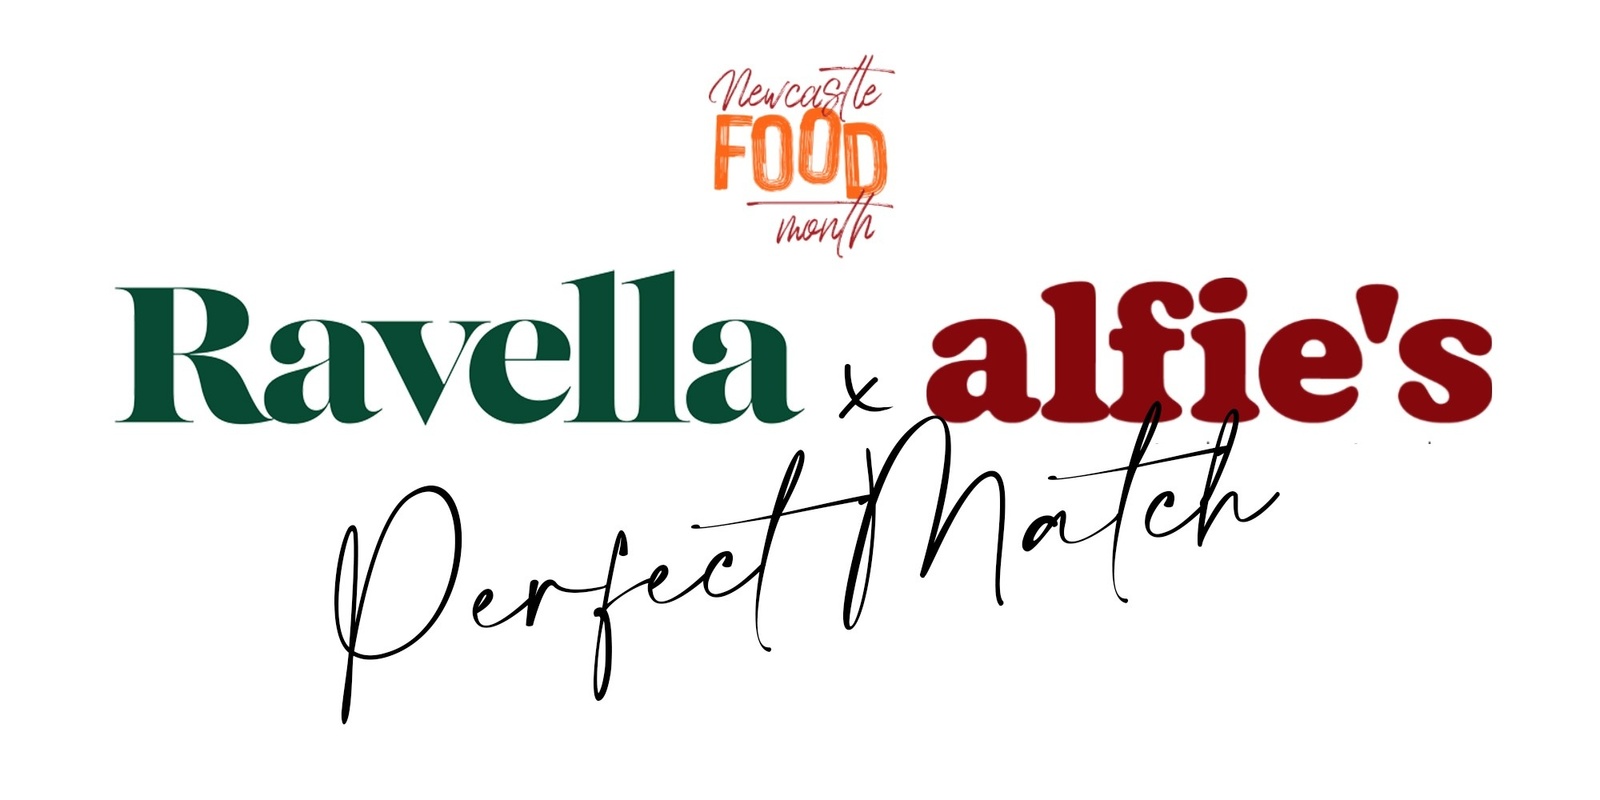 Banner image for NEWCASTLE FOOD MONTH: RAVELLA x ALFIE’S PERFECT MATCH